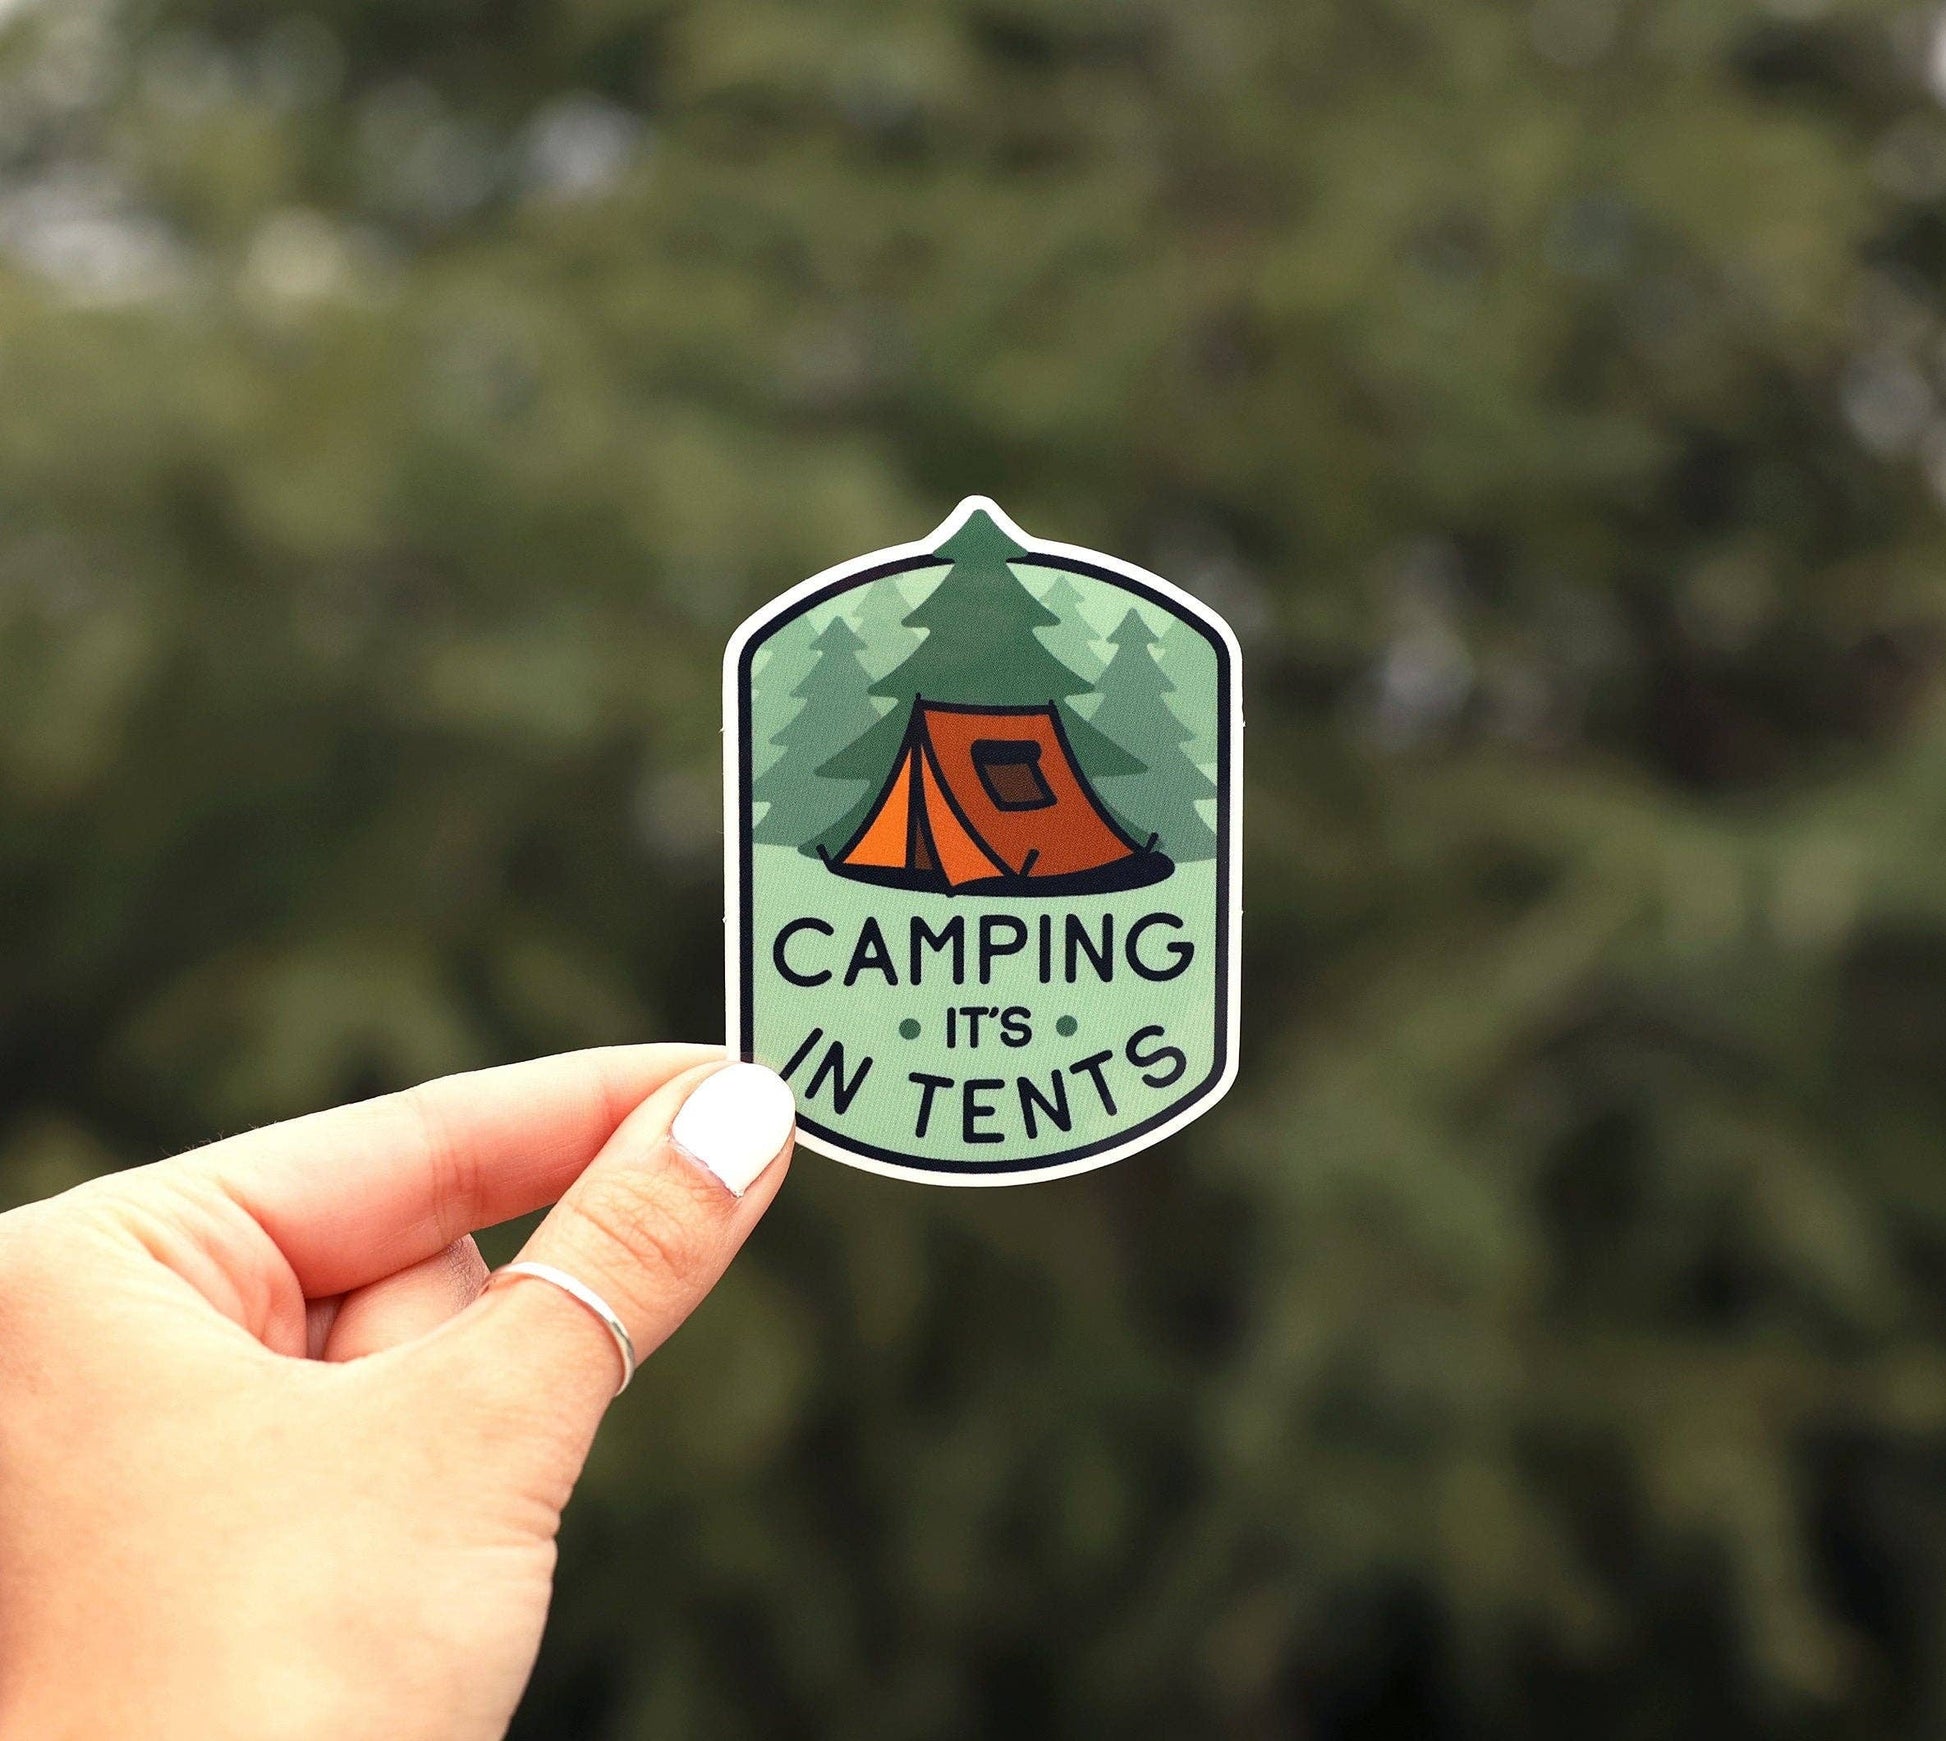 Camping, it's in tents Sticker | Camping Decal | Waterproof Vinyl UV resistant Sticker for adventures outdoors - Storm and Sky Shoppe - Squatchy